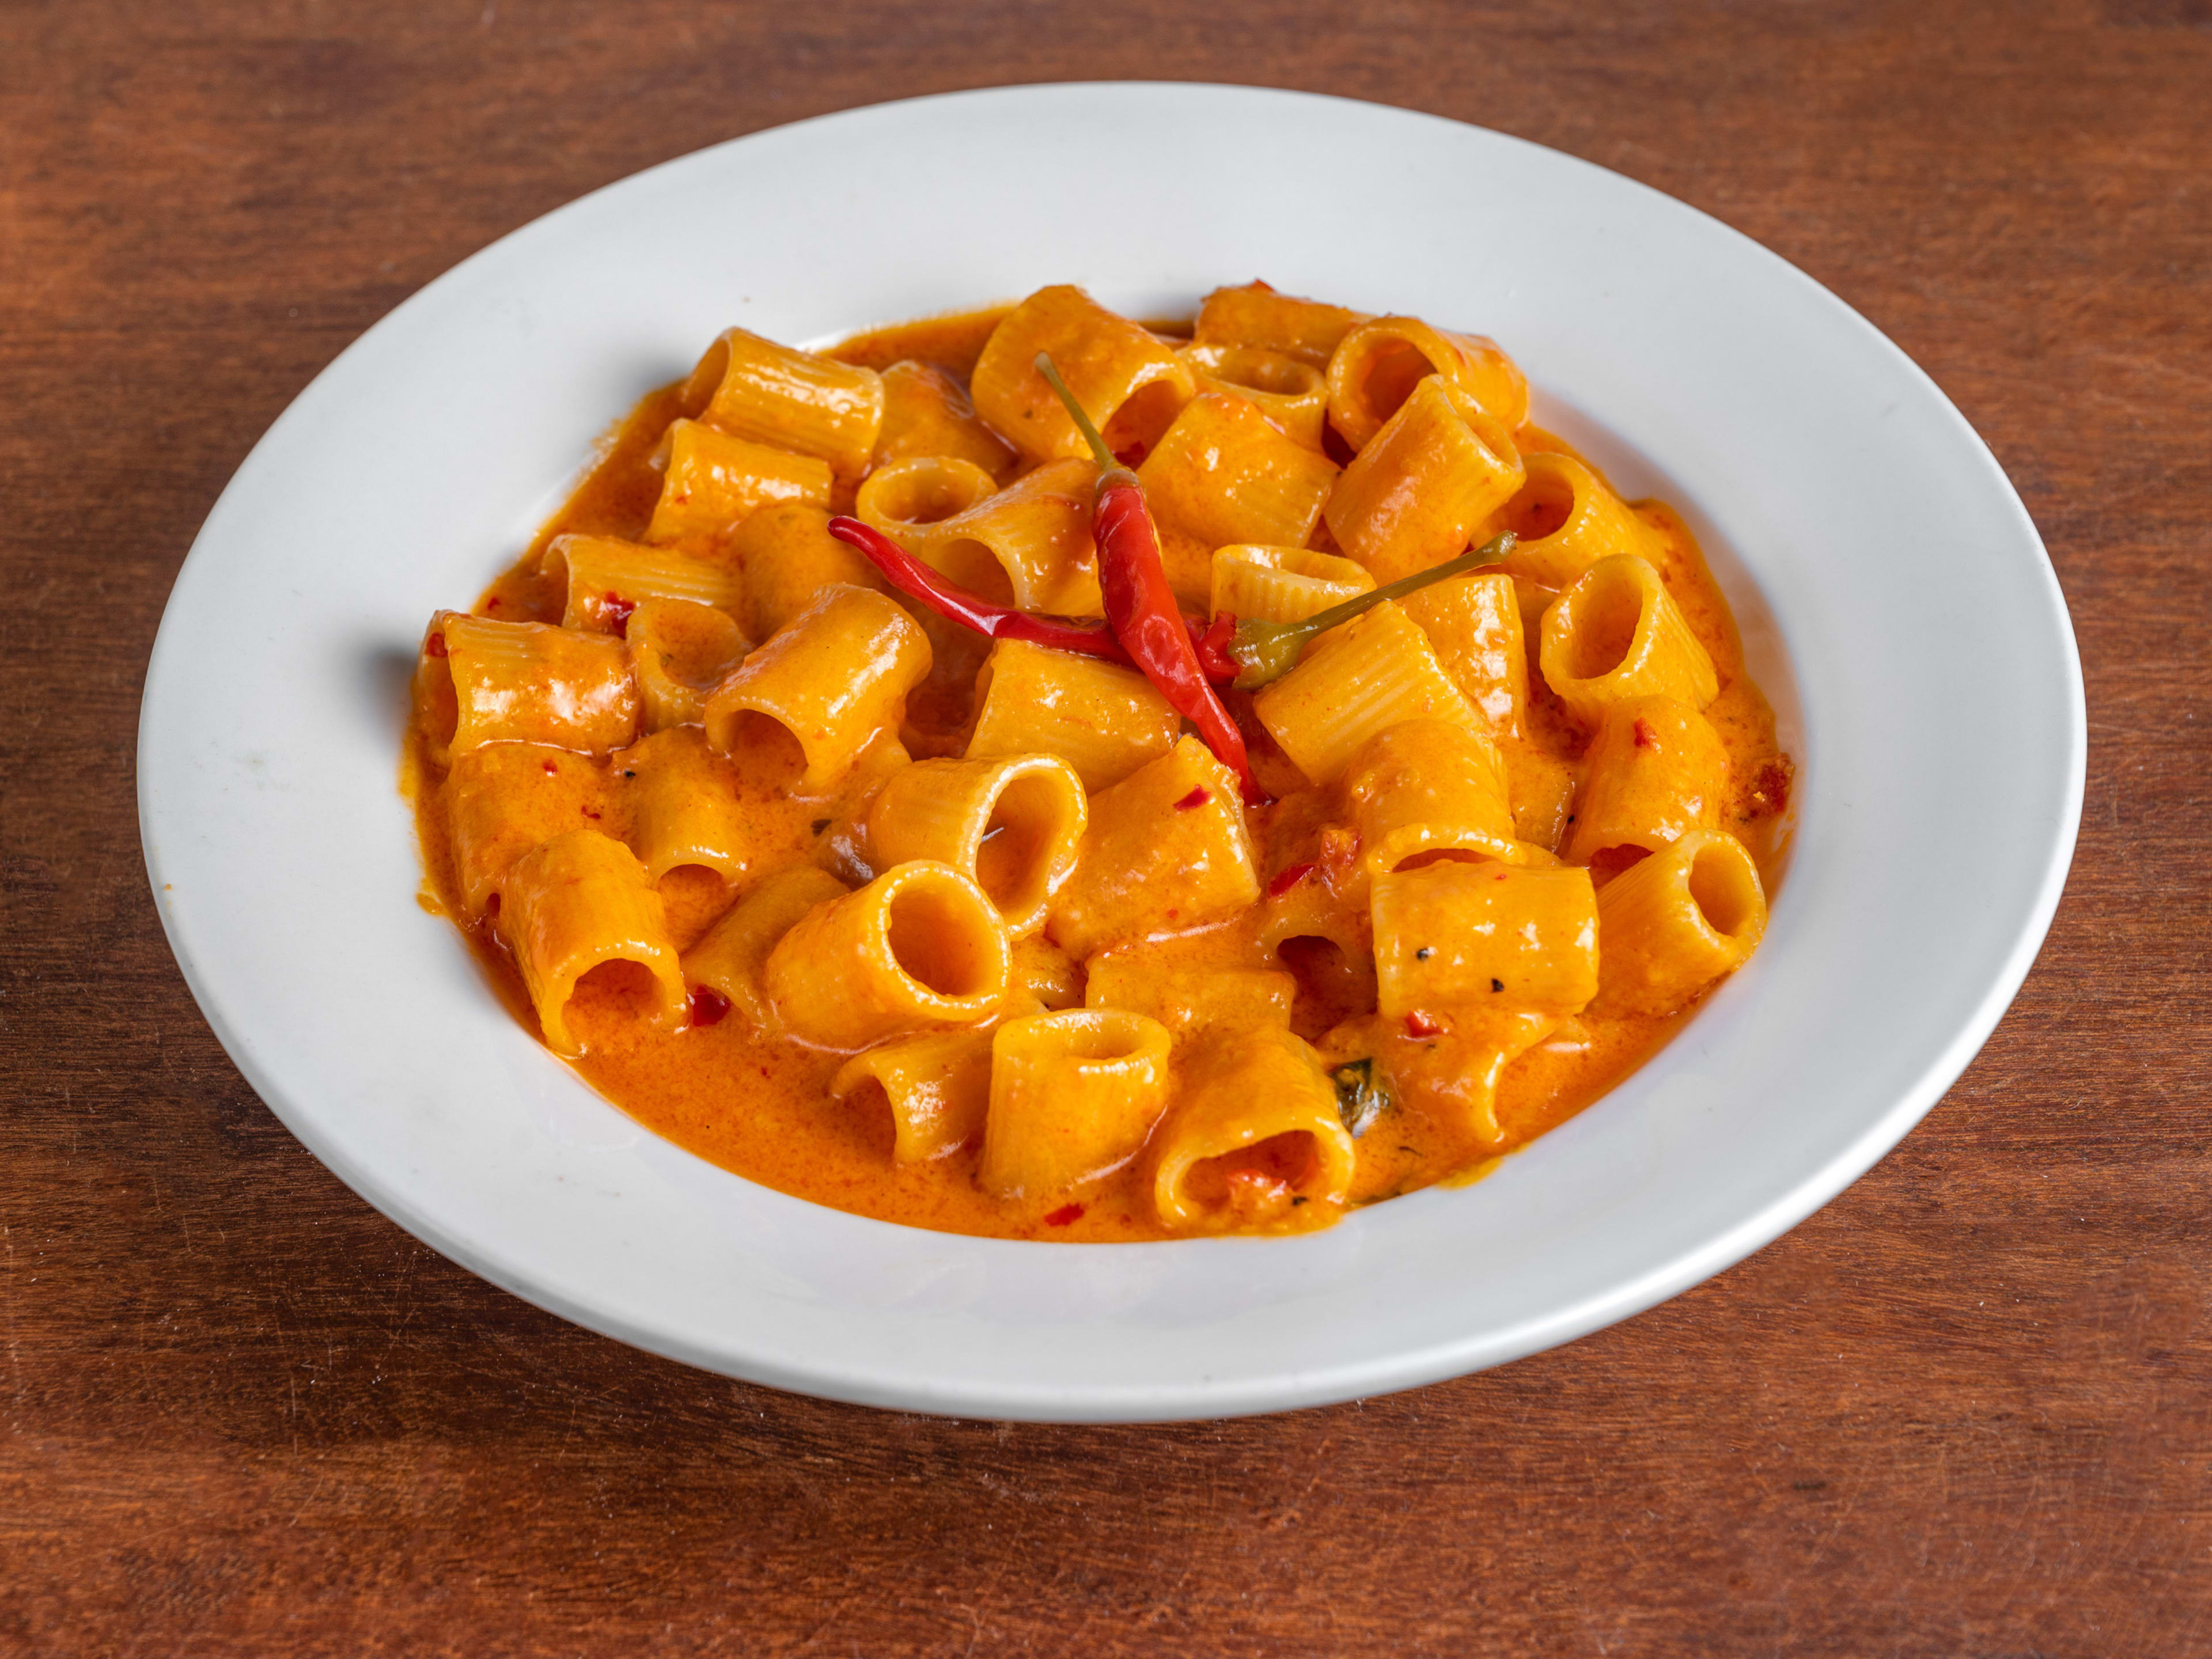 Rigatoni ala vodka with little peppers in the middle in a bowl.